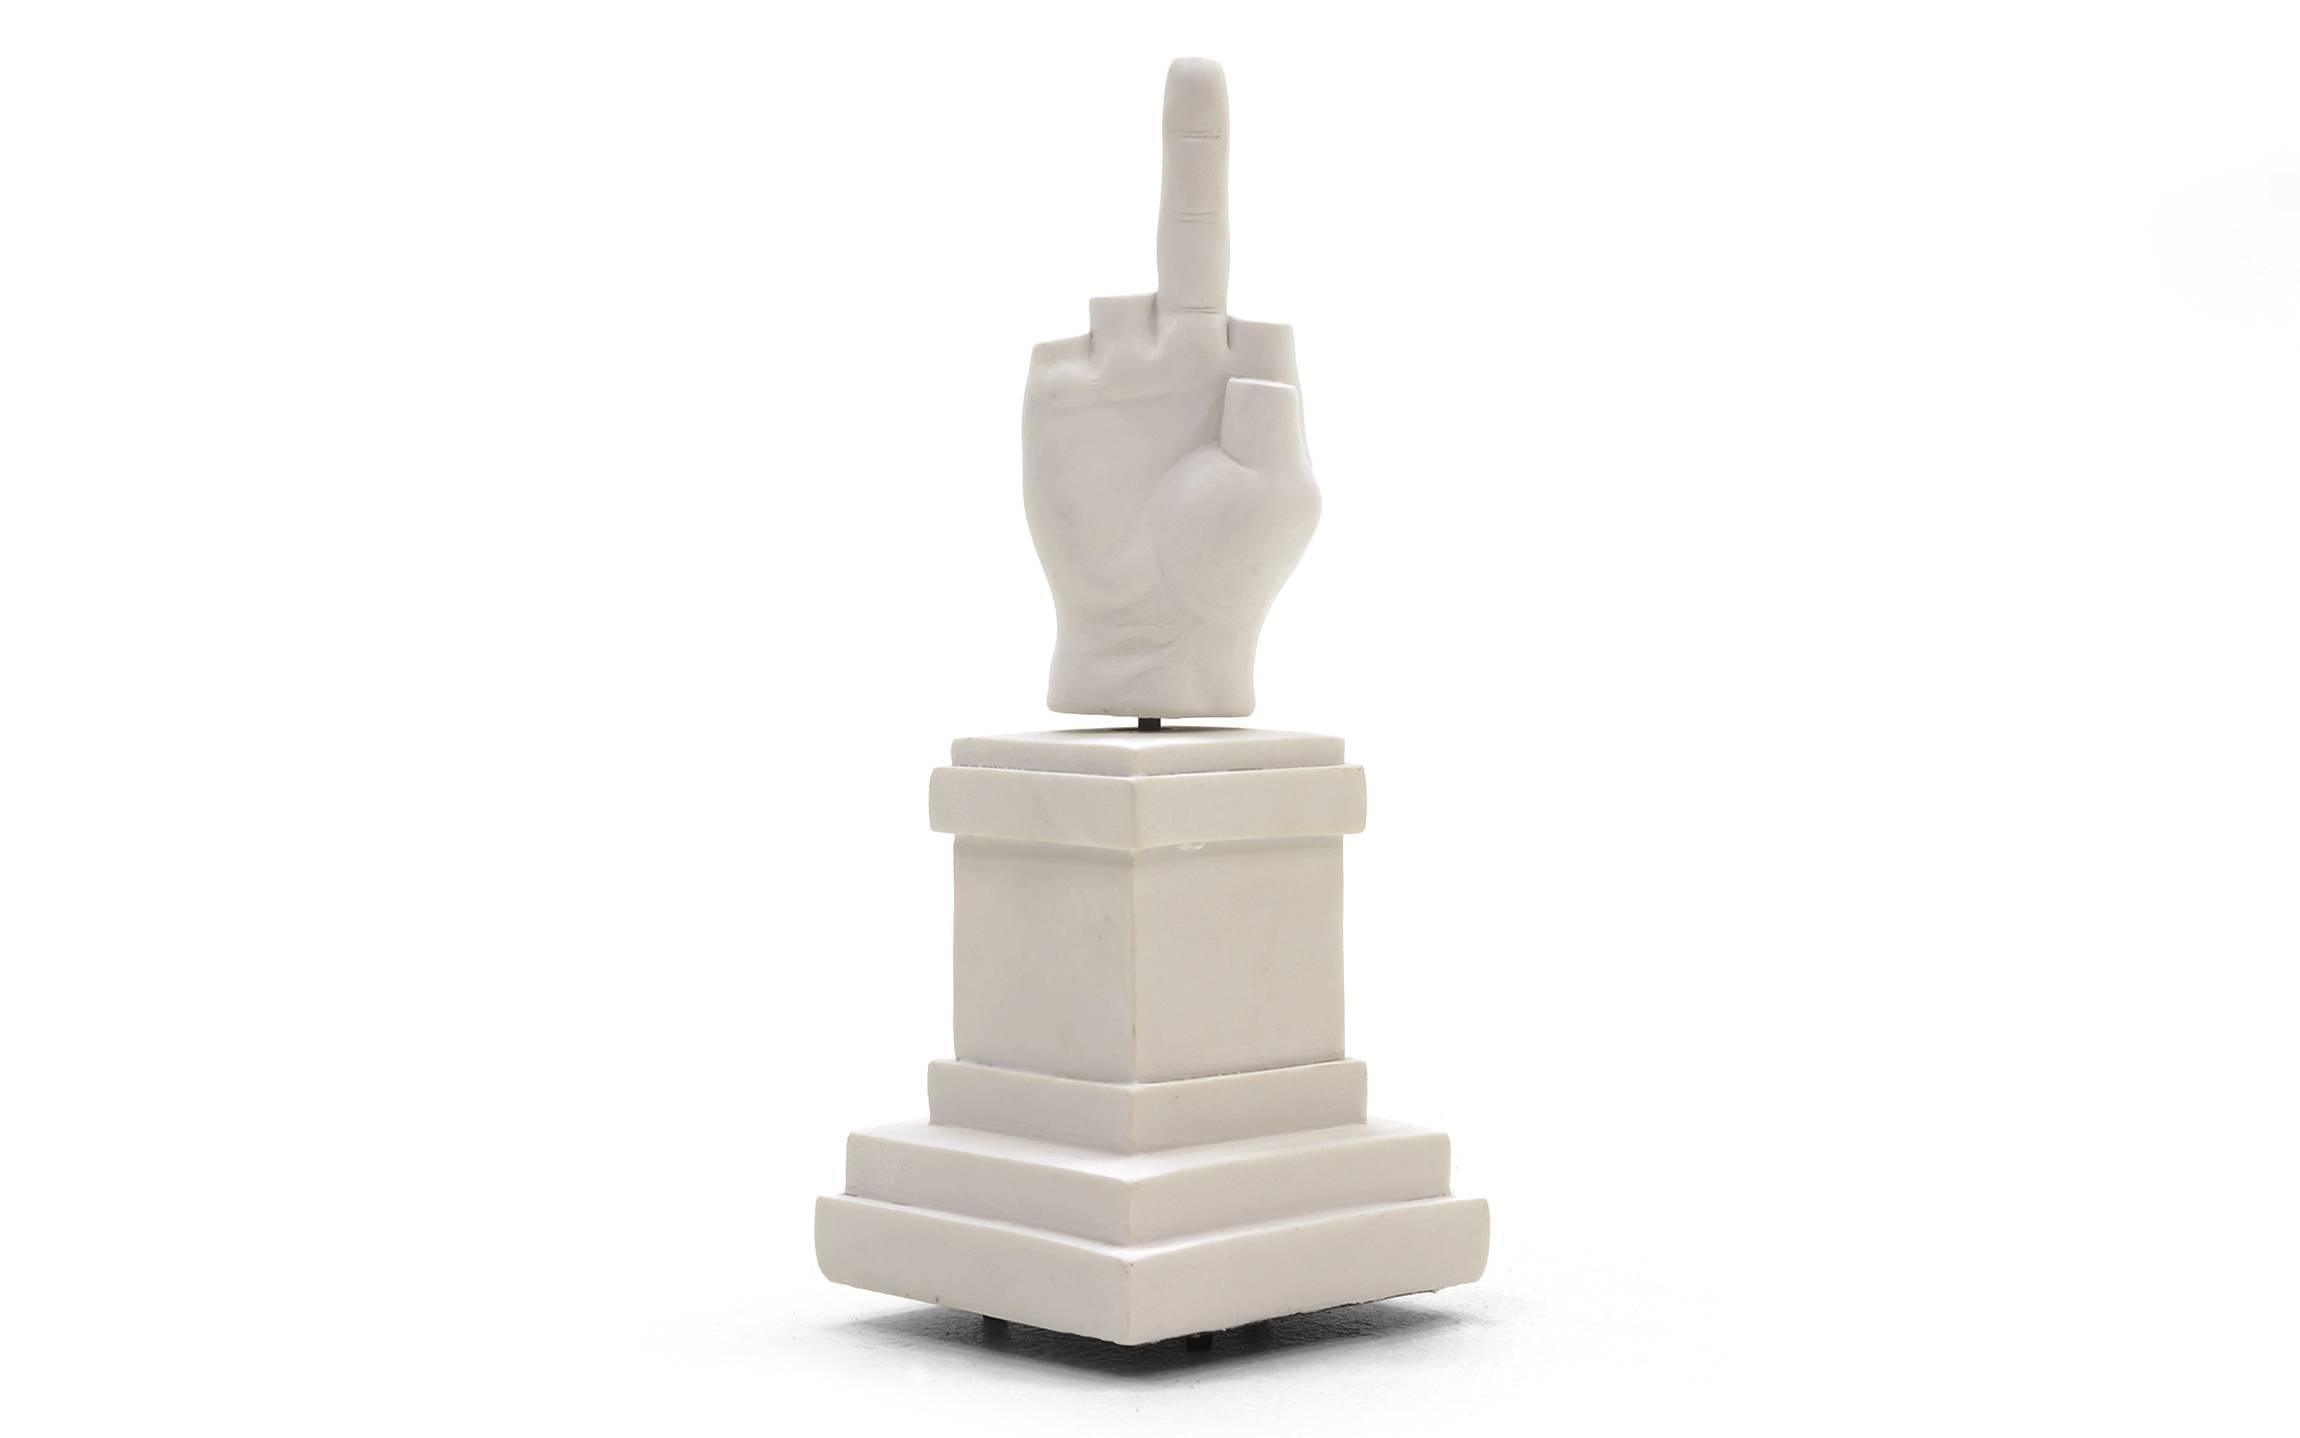 L.O.V.E. Music Box. Produced as a statement against Fascism. It is the Fascist salute with all but one finger cut off. The hand turns as the music plays. This is a 1:39 Scale Reproduction of L.O.V.E. by Maurizio Cattelan Installed in 2010 in Piazza